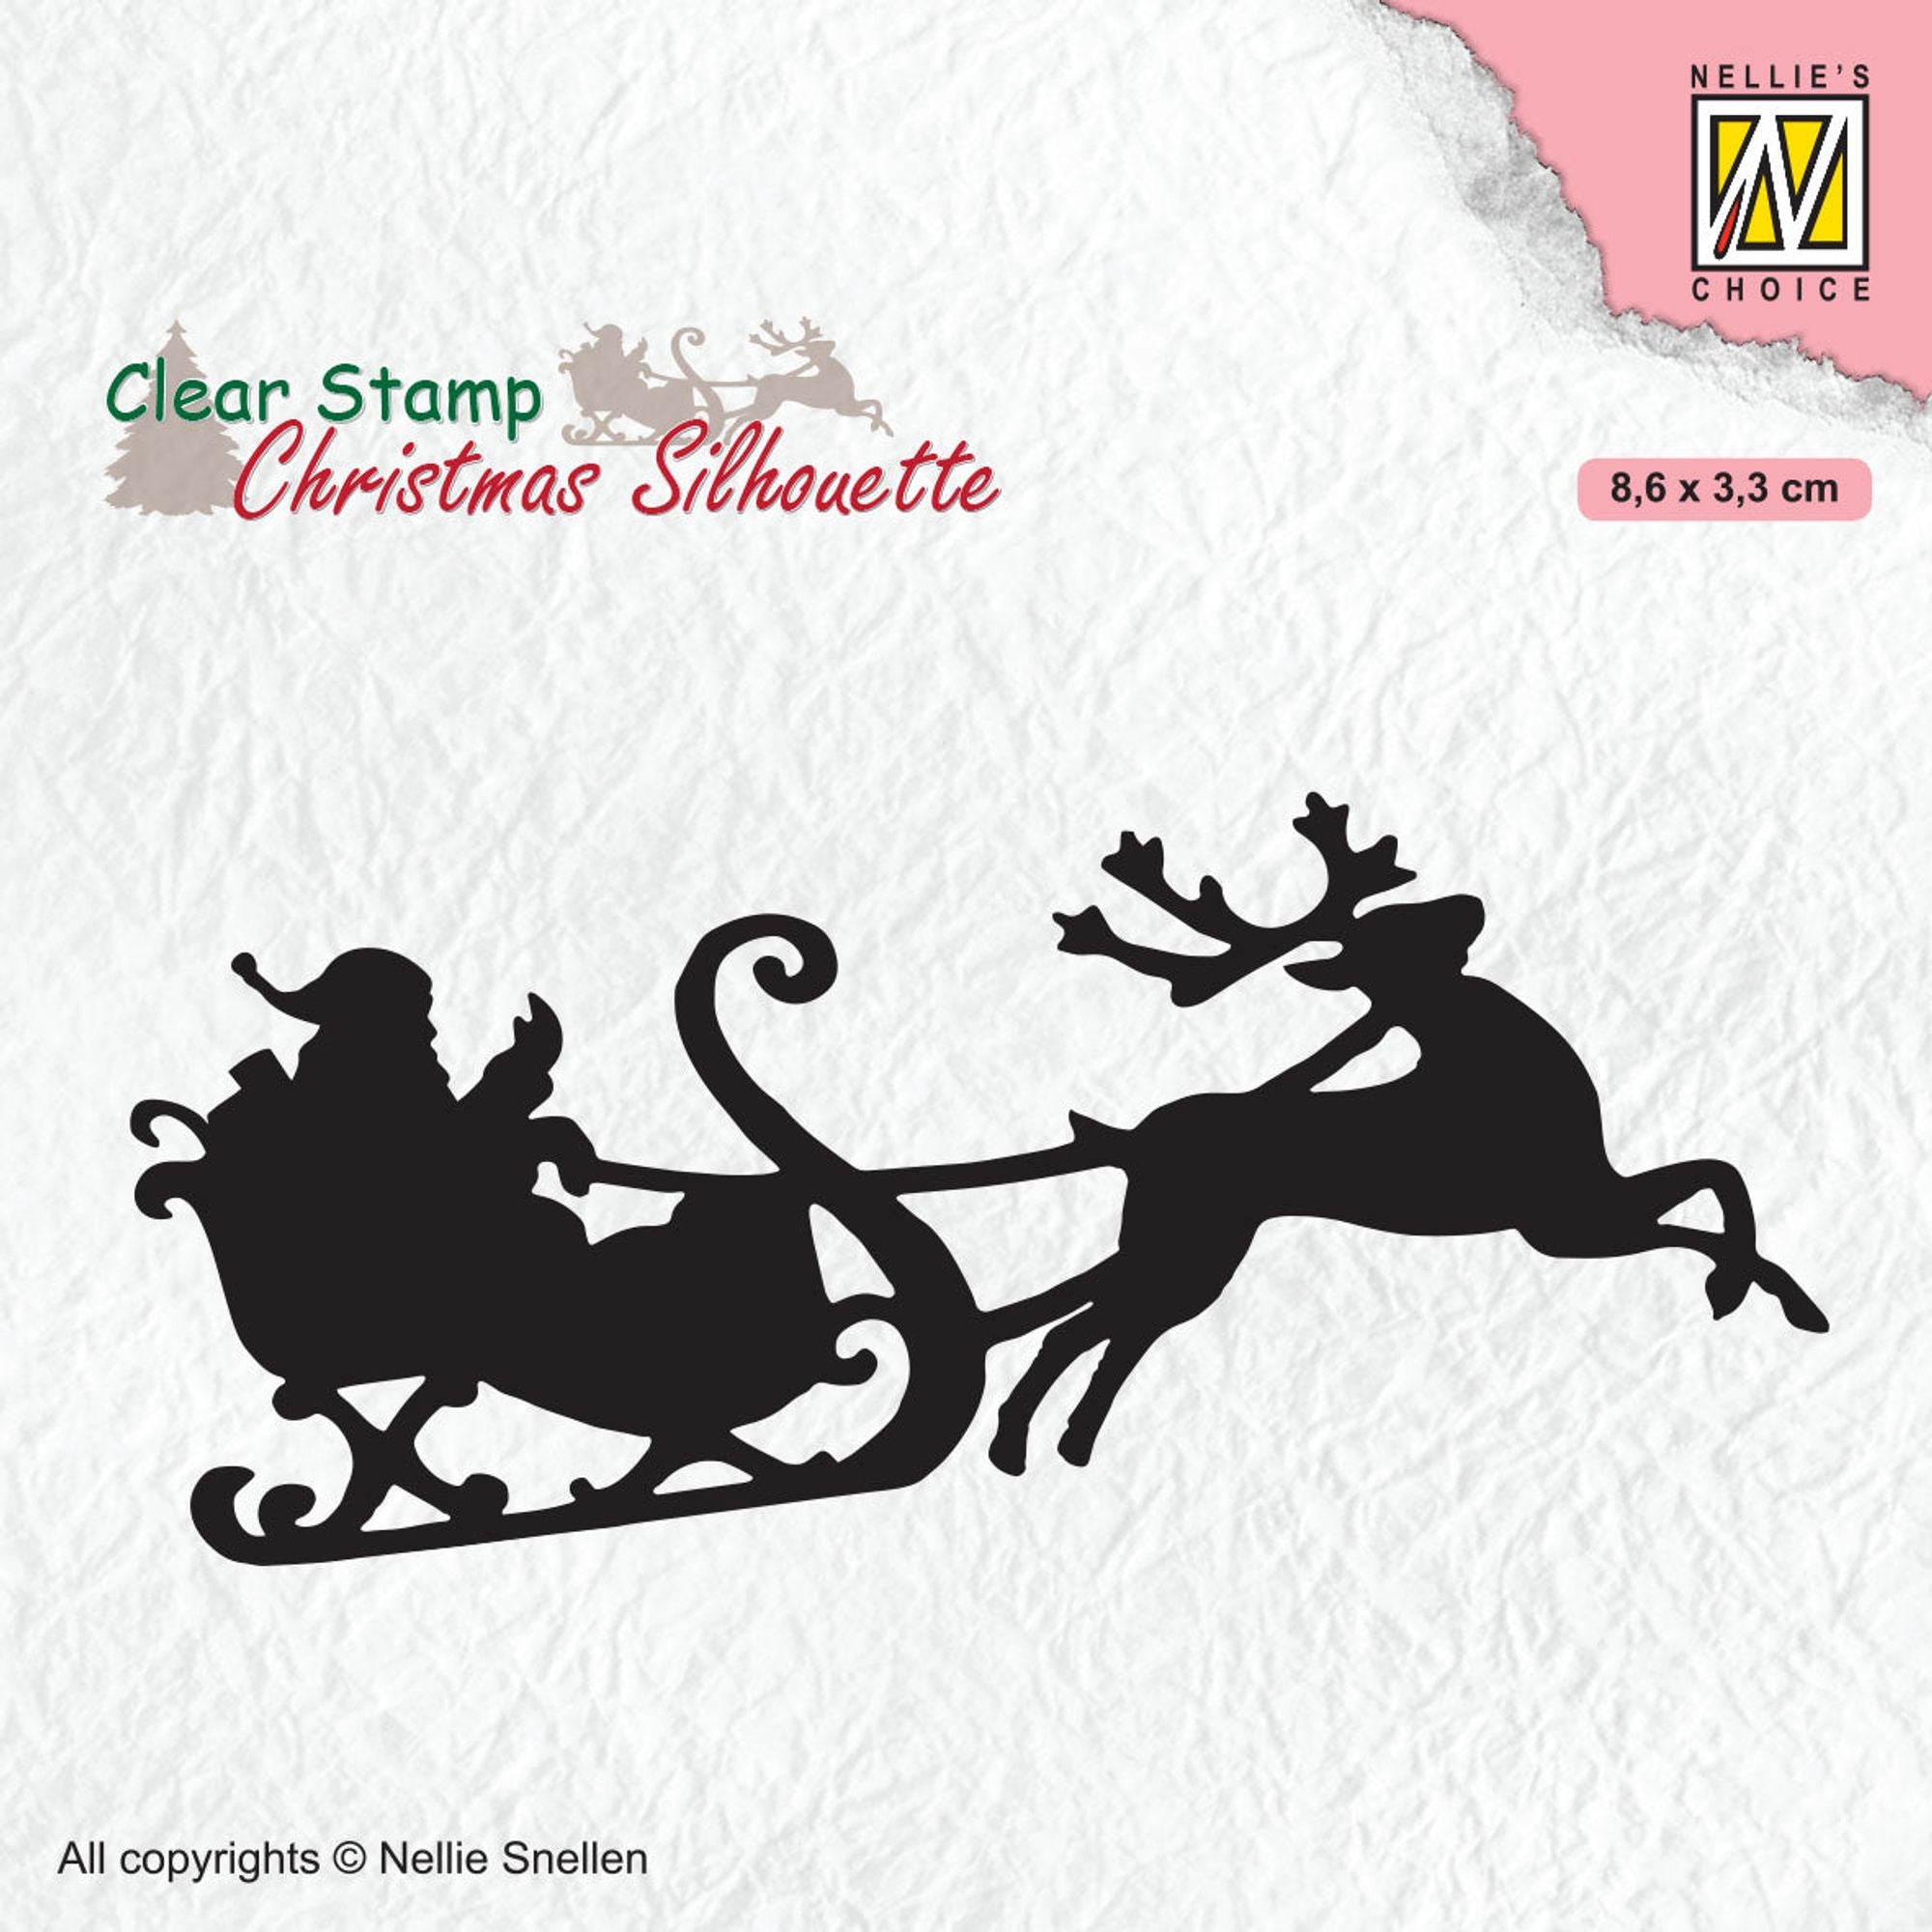 Clear Stamp Silhouette Santa Claus with Reindeer Sleight